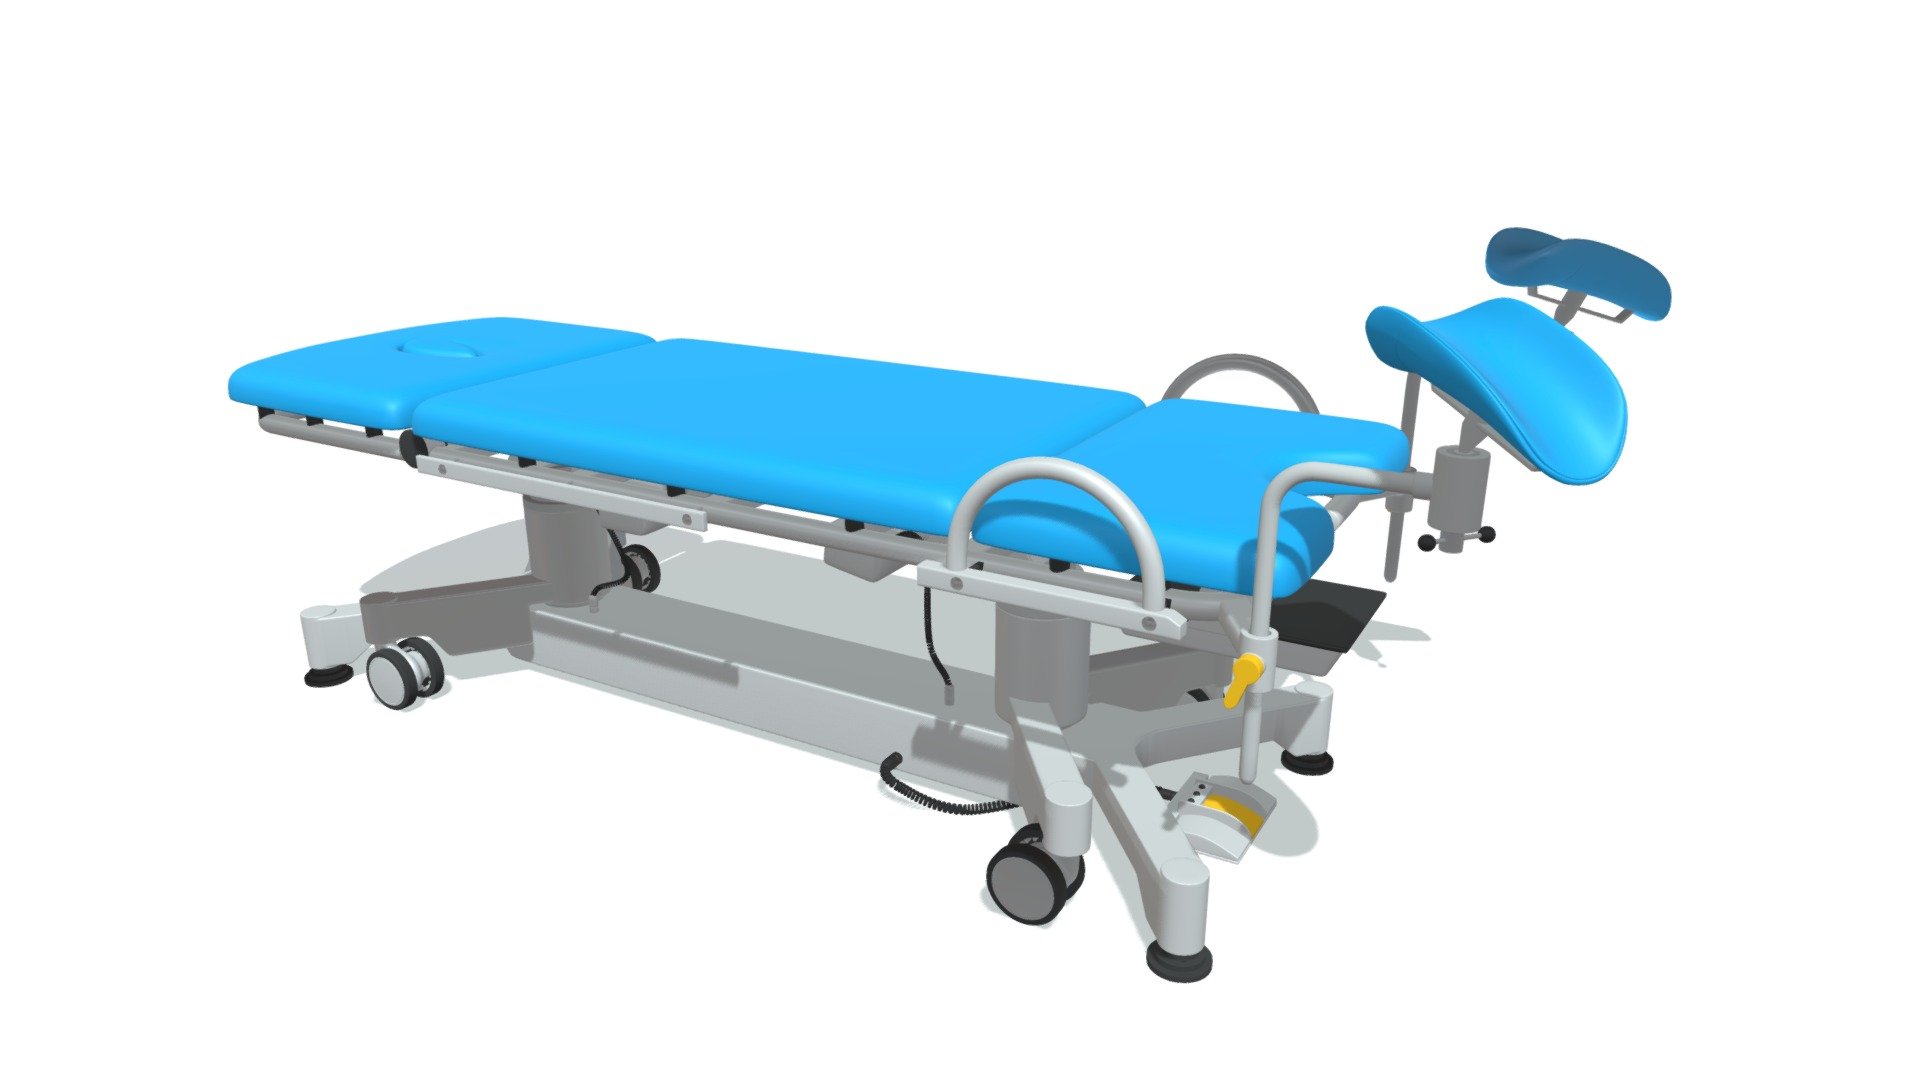 High quality 3d model of gynecological examination table.
Colors can be easily modified 3d model